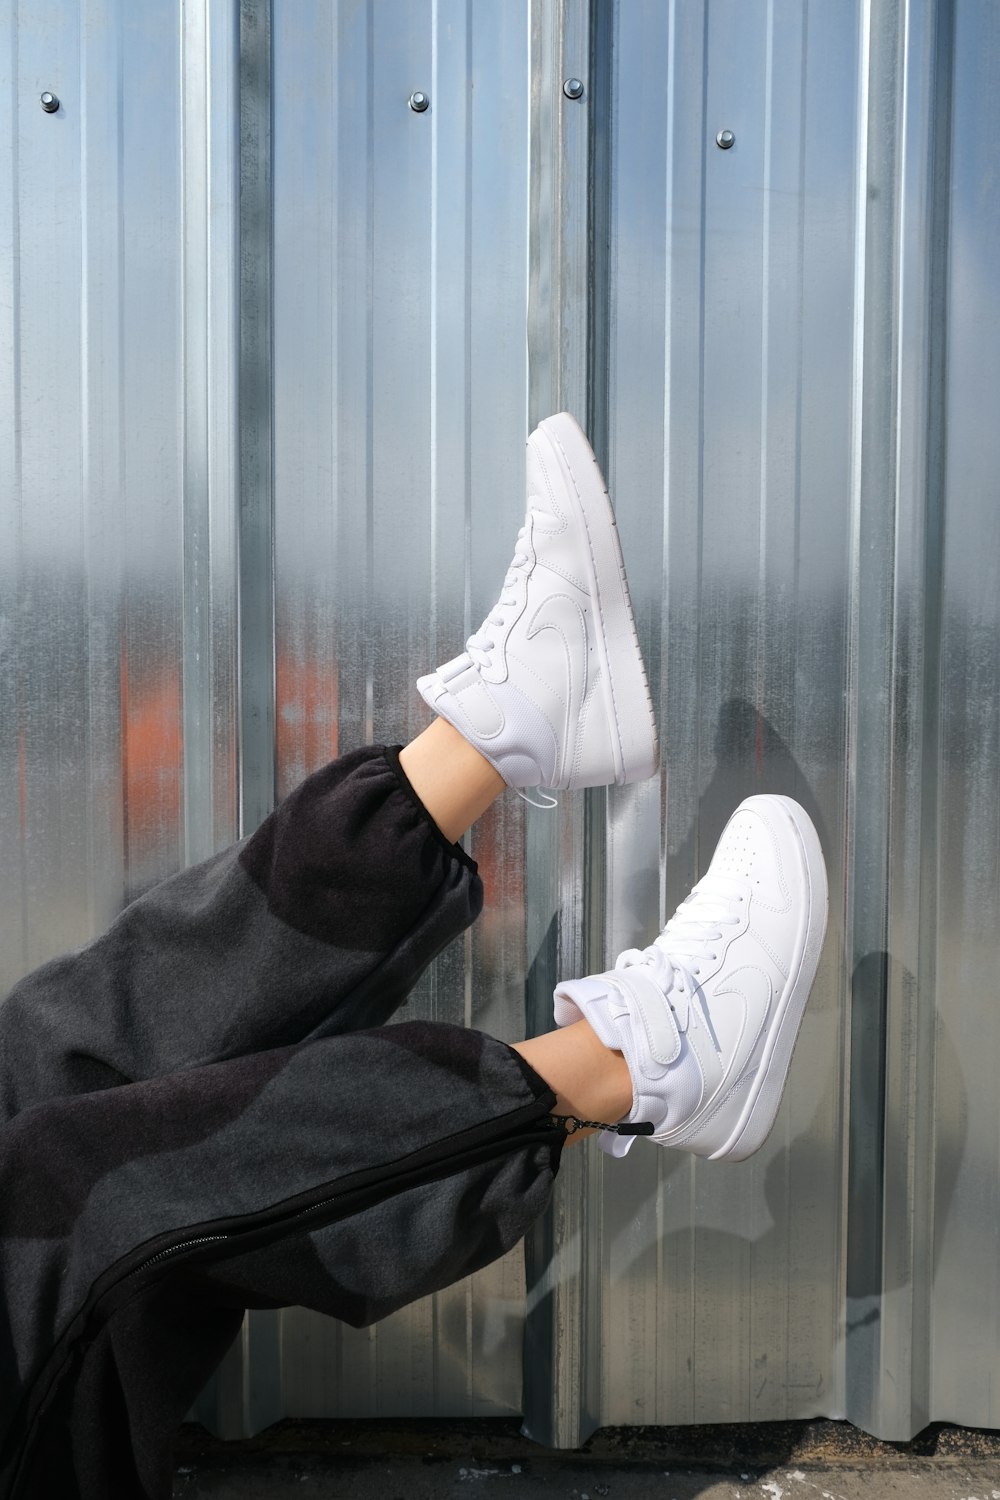 Nike Women Pictures | Download Free Images on Unsplash